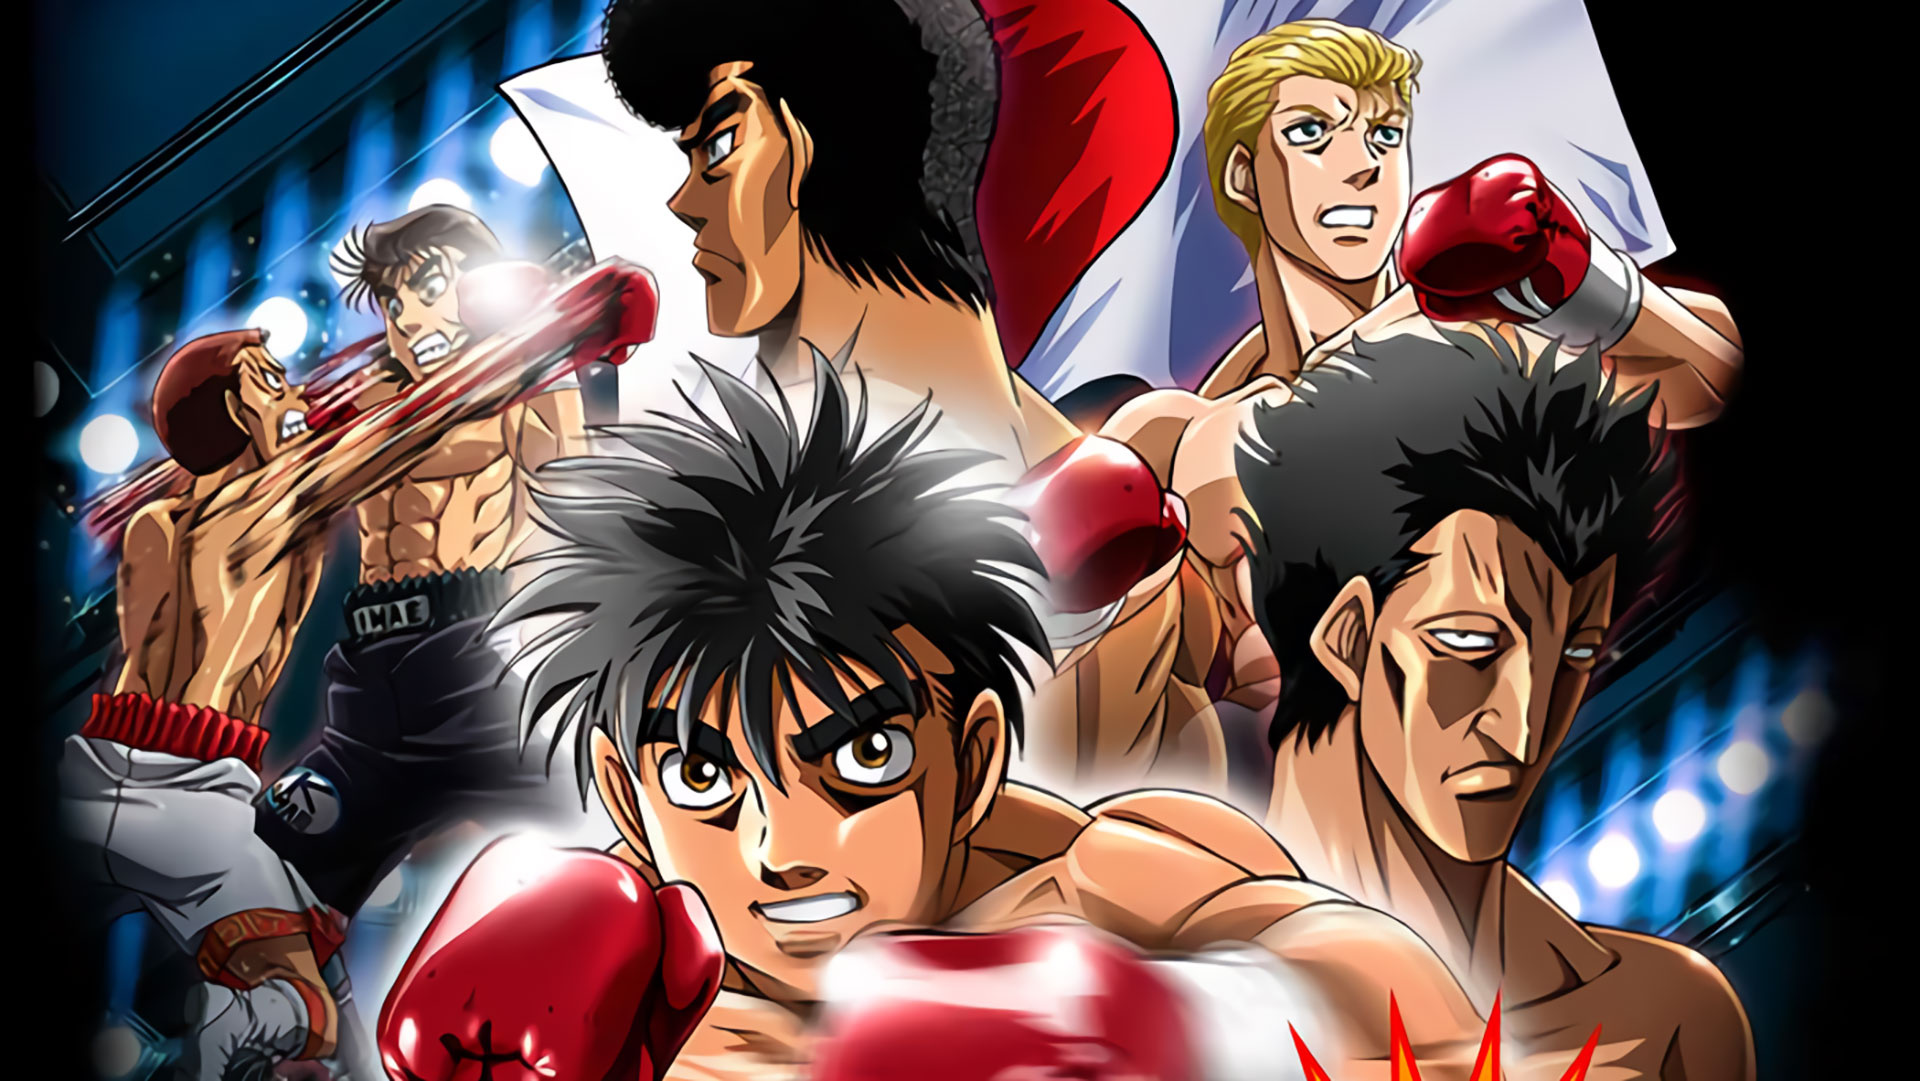 Hajime no Ippo watch order, Anime episodes and movies, Anime Tide article, Recommended anime series, 1920x1090 HD Desktop